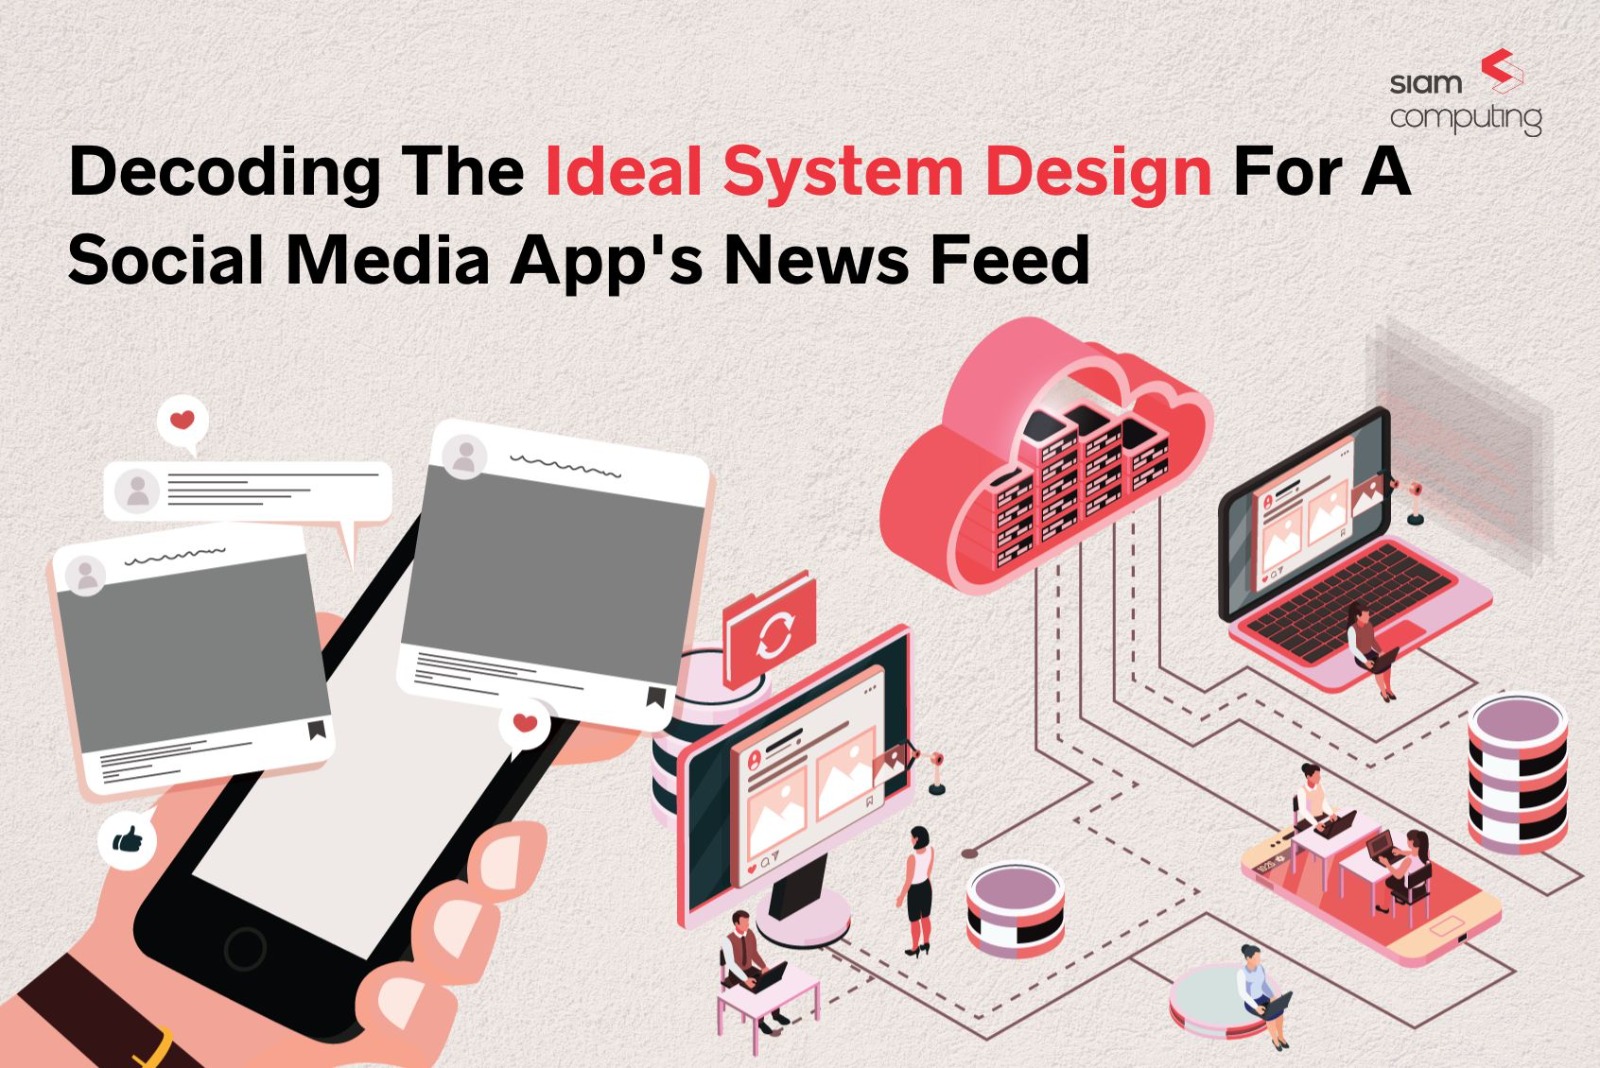 Decoding The Ideal System Design For A Social Media App’s News Feed